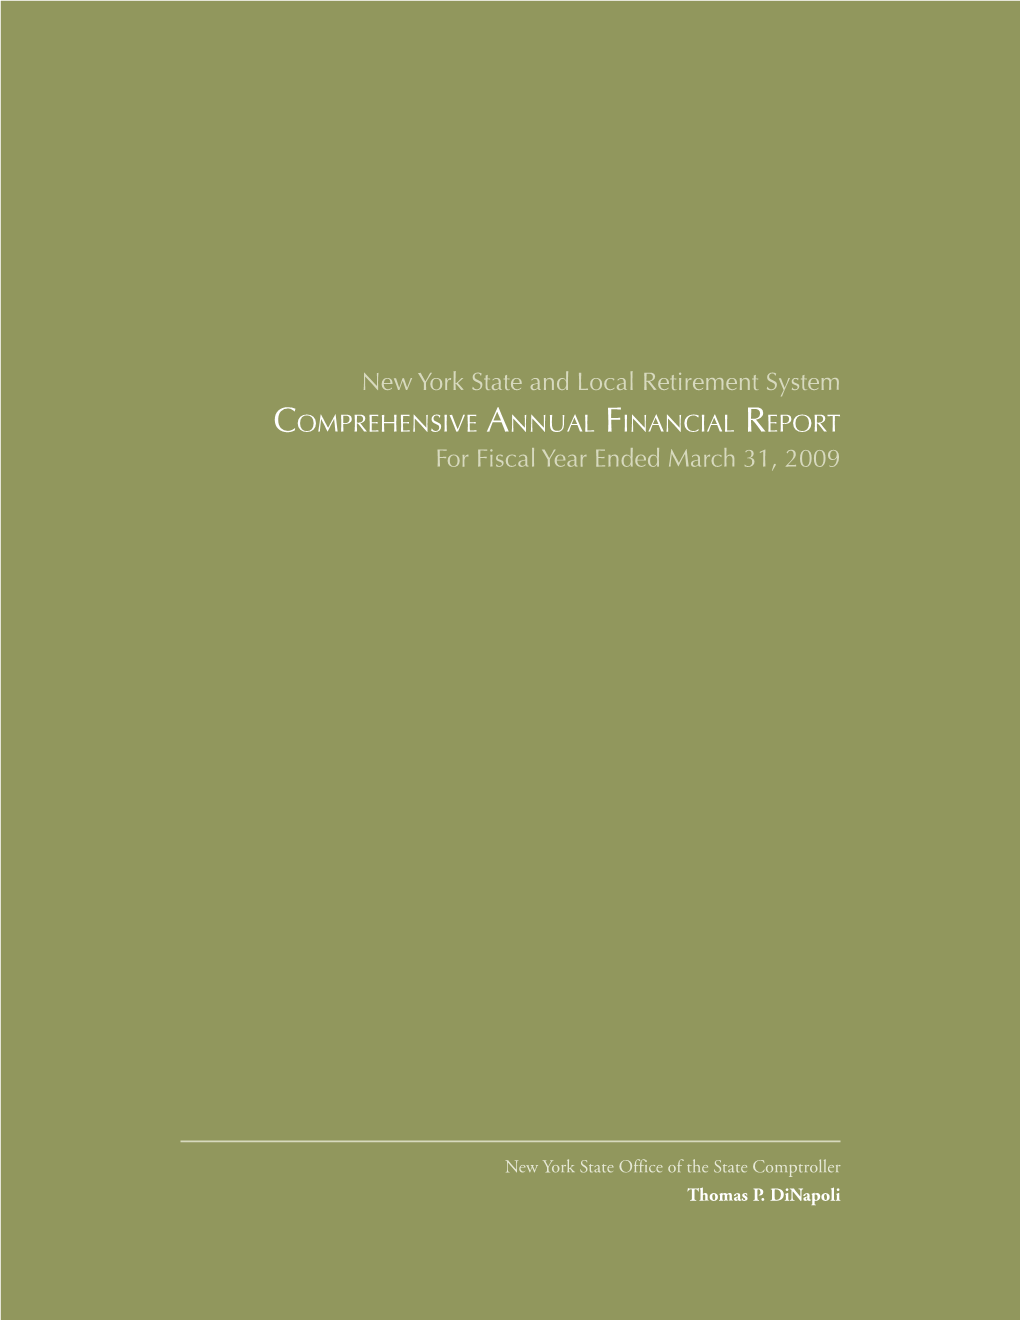 2009 Comprehensive Annual Financial Report 7 Introduction